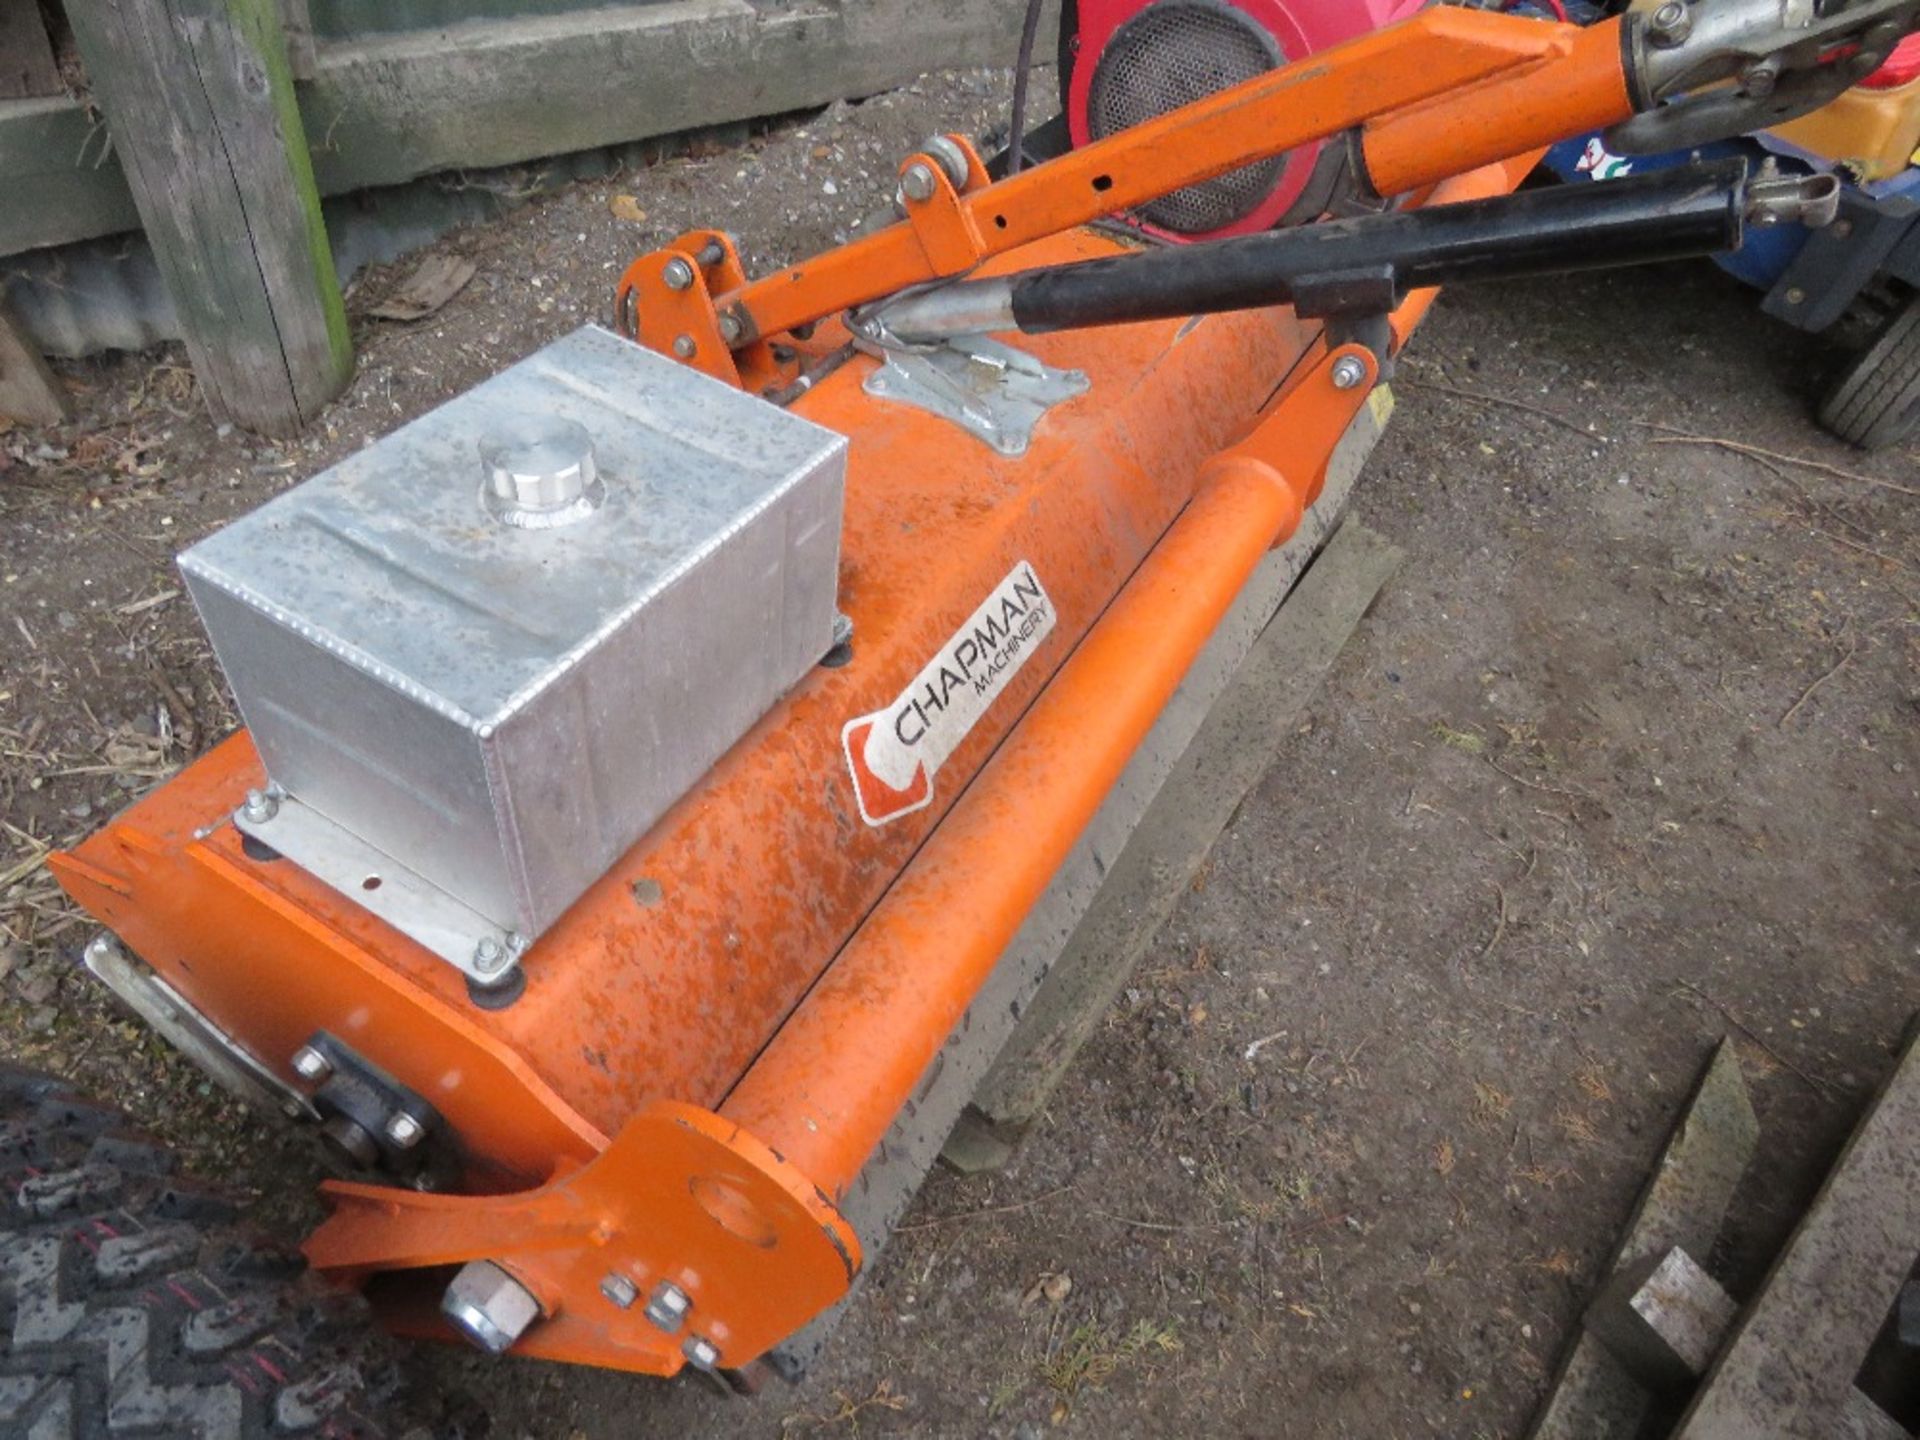 CHAPMAN MACHINERY FM150 PETROL ENGINED HEAVY DUTY FLAIL MOWER FOR TOWING BEHIND QUAD ETC. 1.5M WORKI - Image 3 of 9